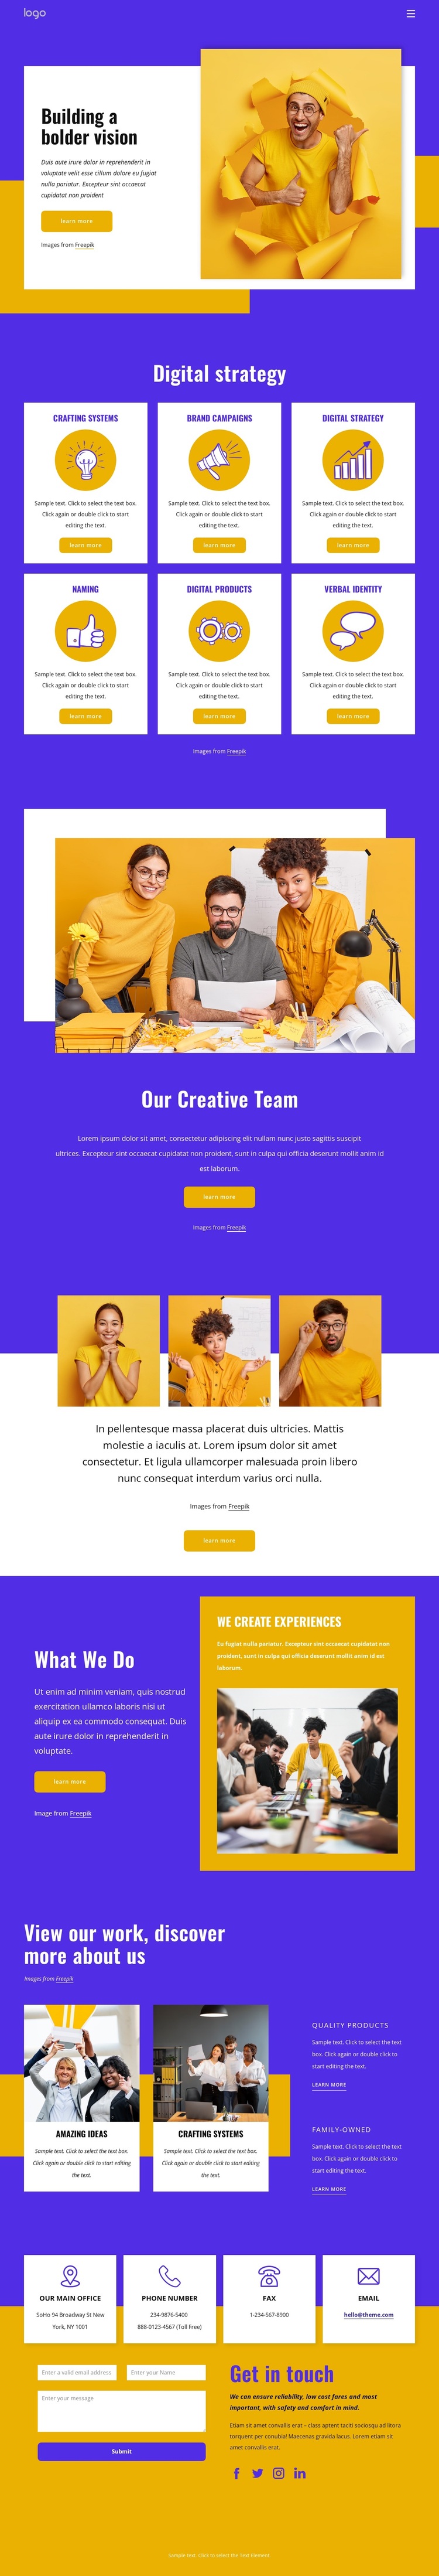 UX design and branding agency Template